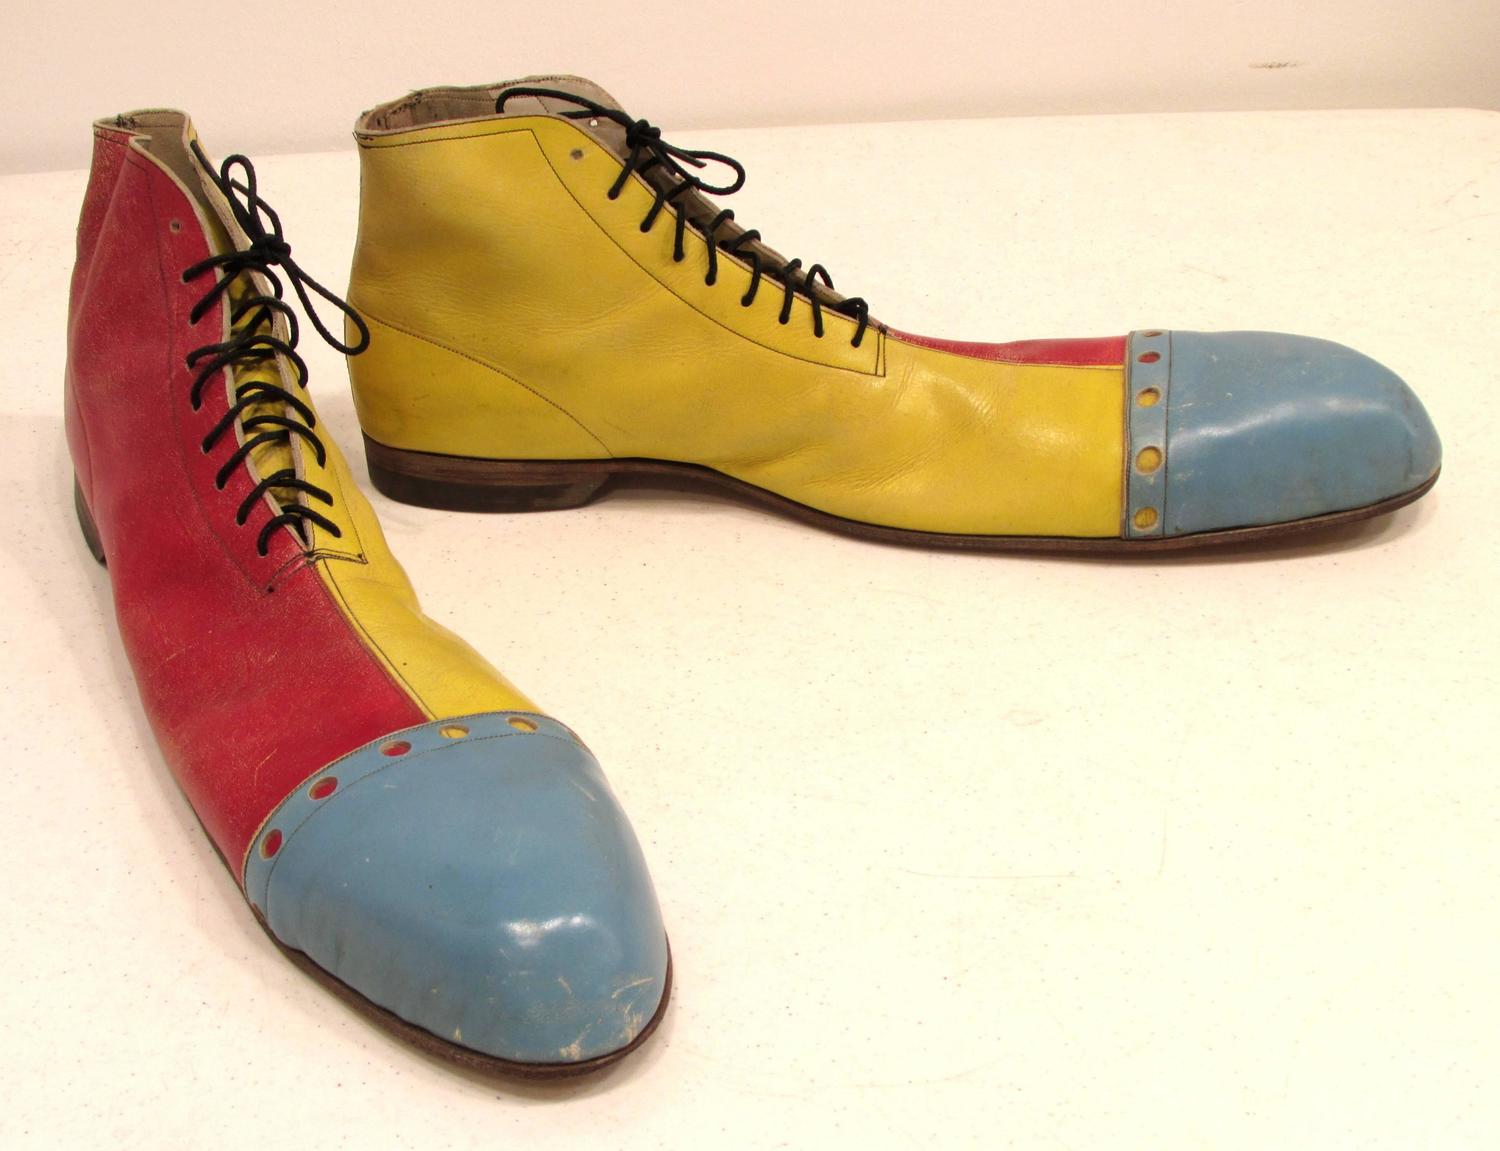 Pair Of Long Multicolor Vintage Clown Shoes For Sale At 1stdibs 